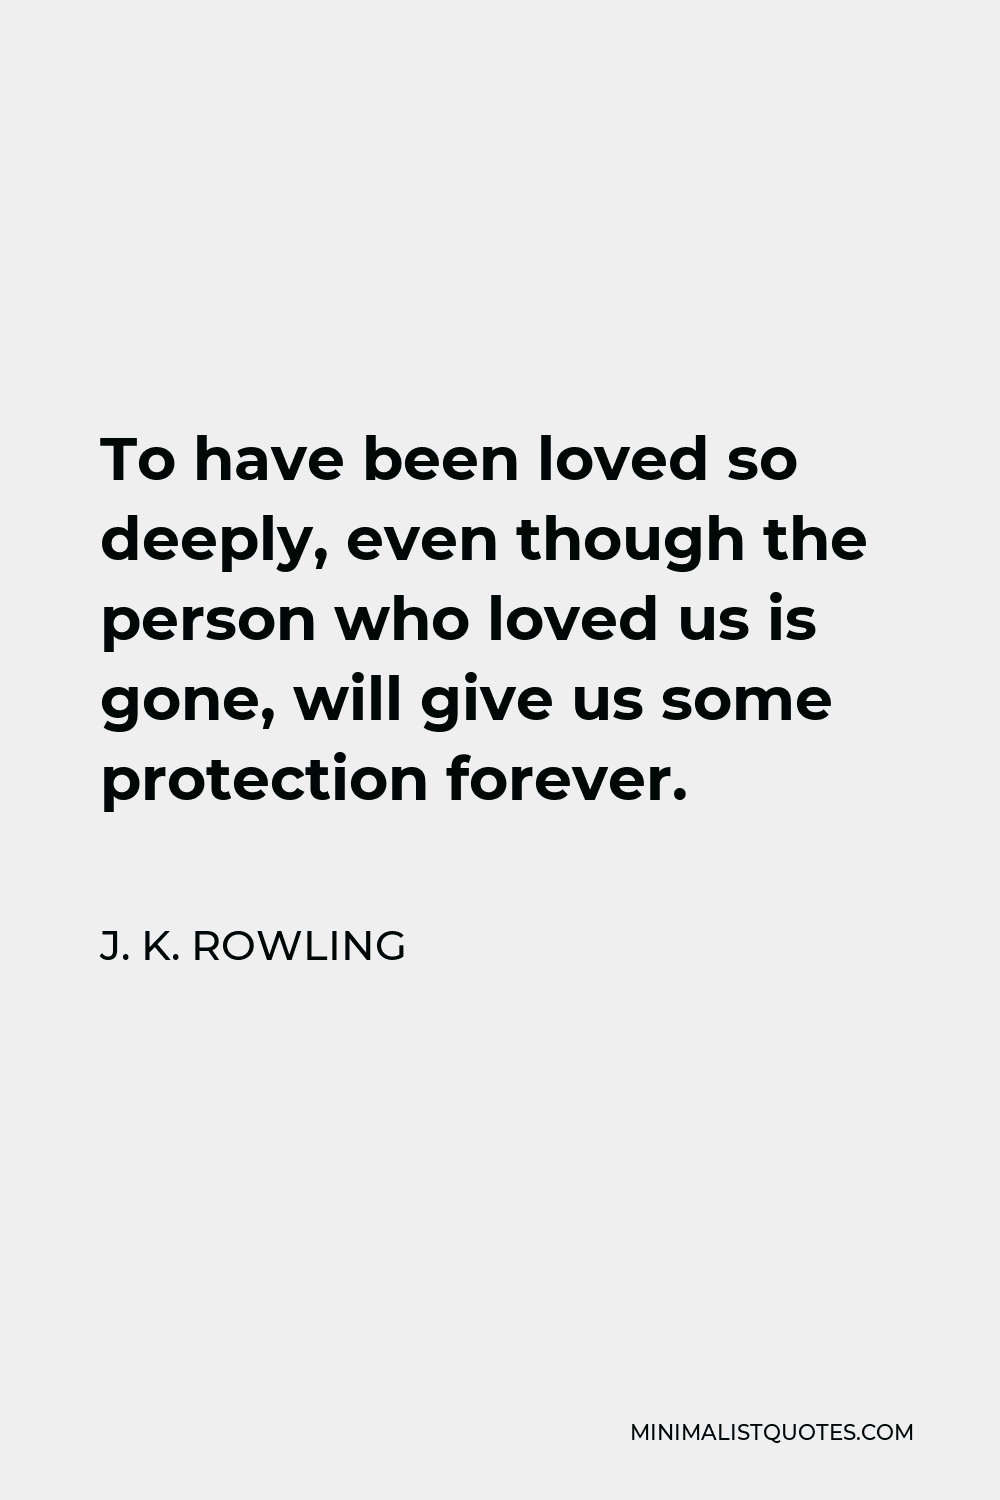 J. K. Rowling Quote - To have been loved so deeply, even though the person who loved us is gone, will give us some protection forever.